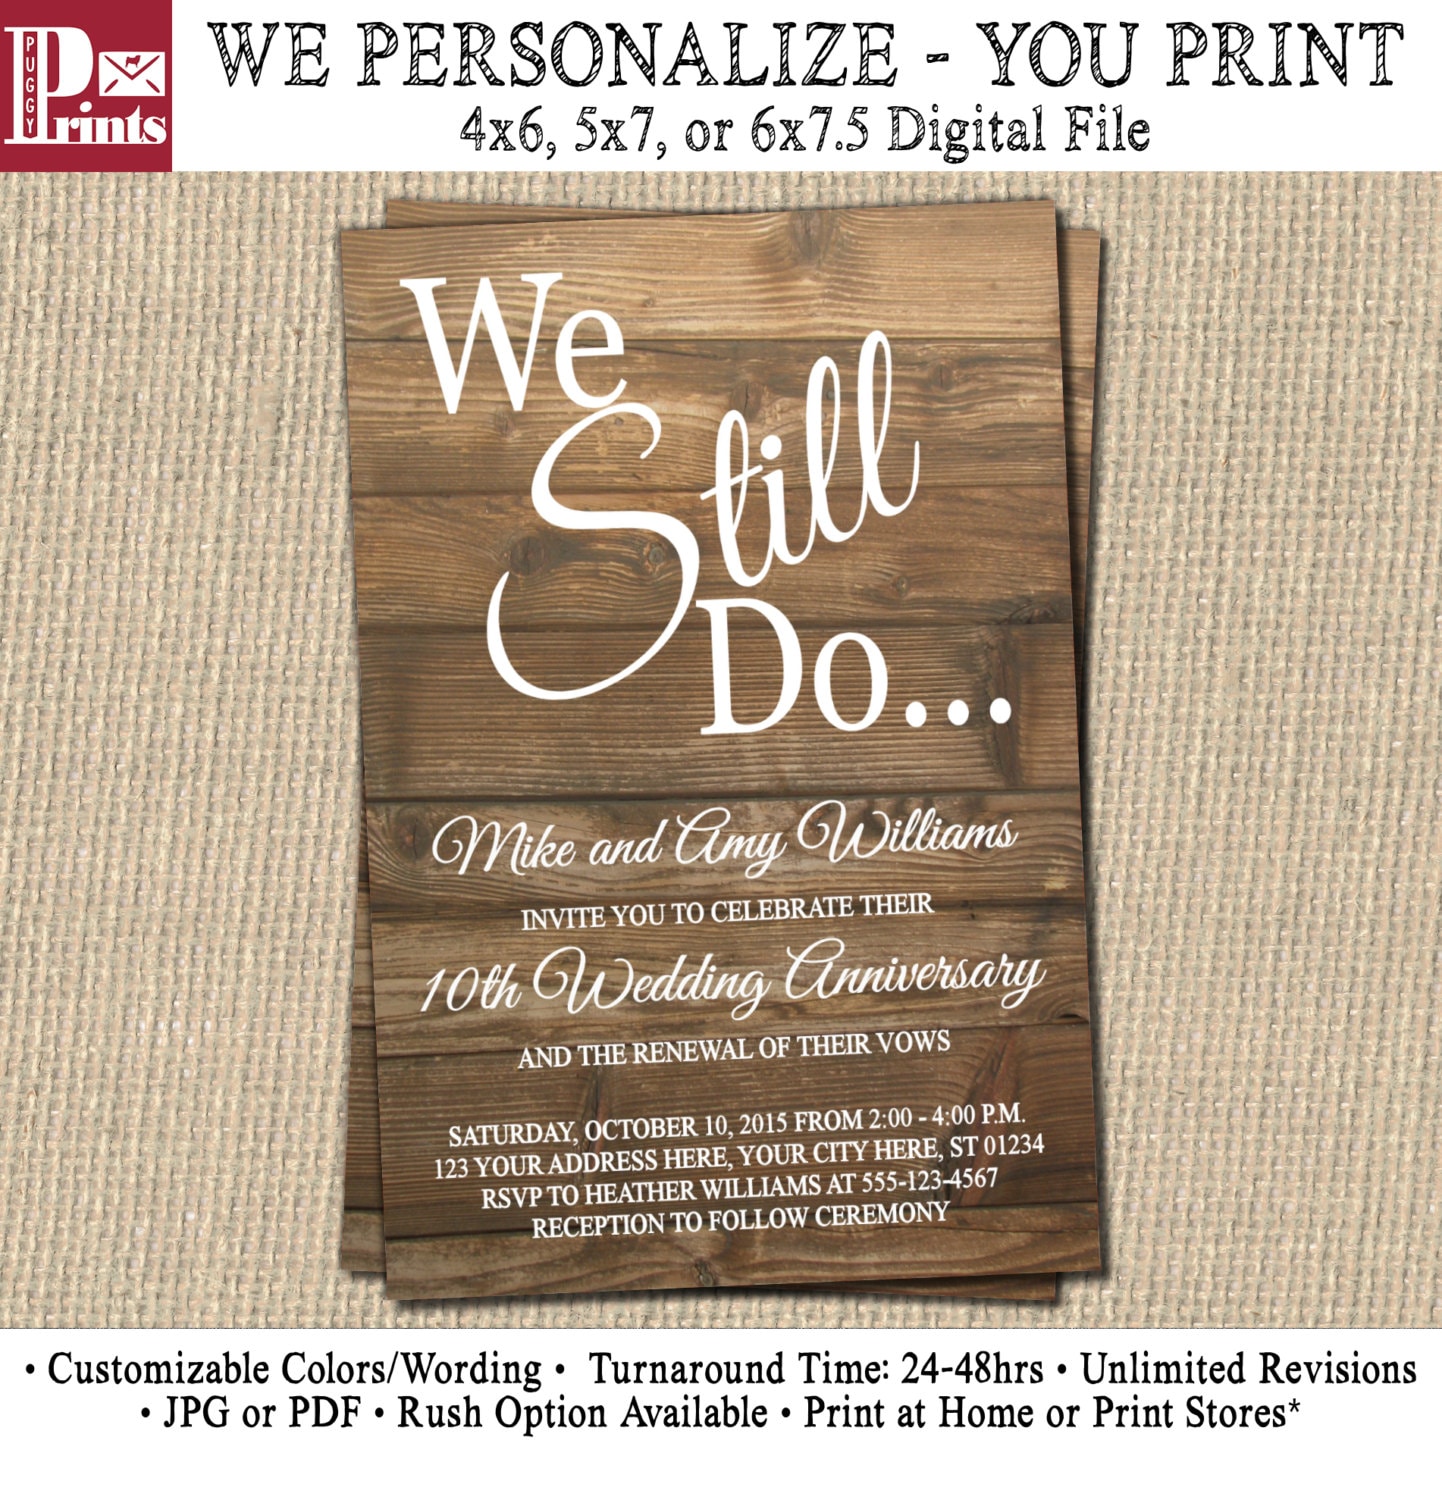 Vow Renewal Invitation Wedding Anniversary by PuggyPrints on Etsy